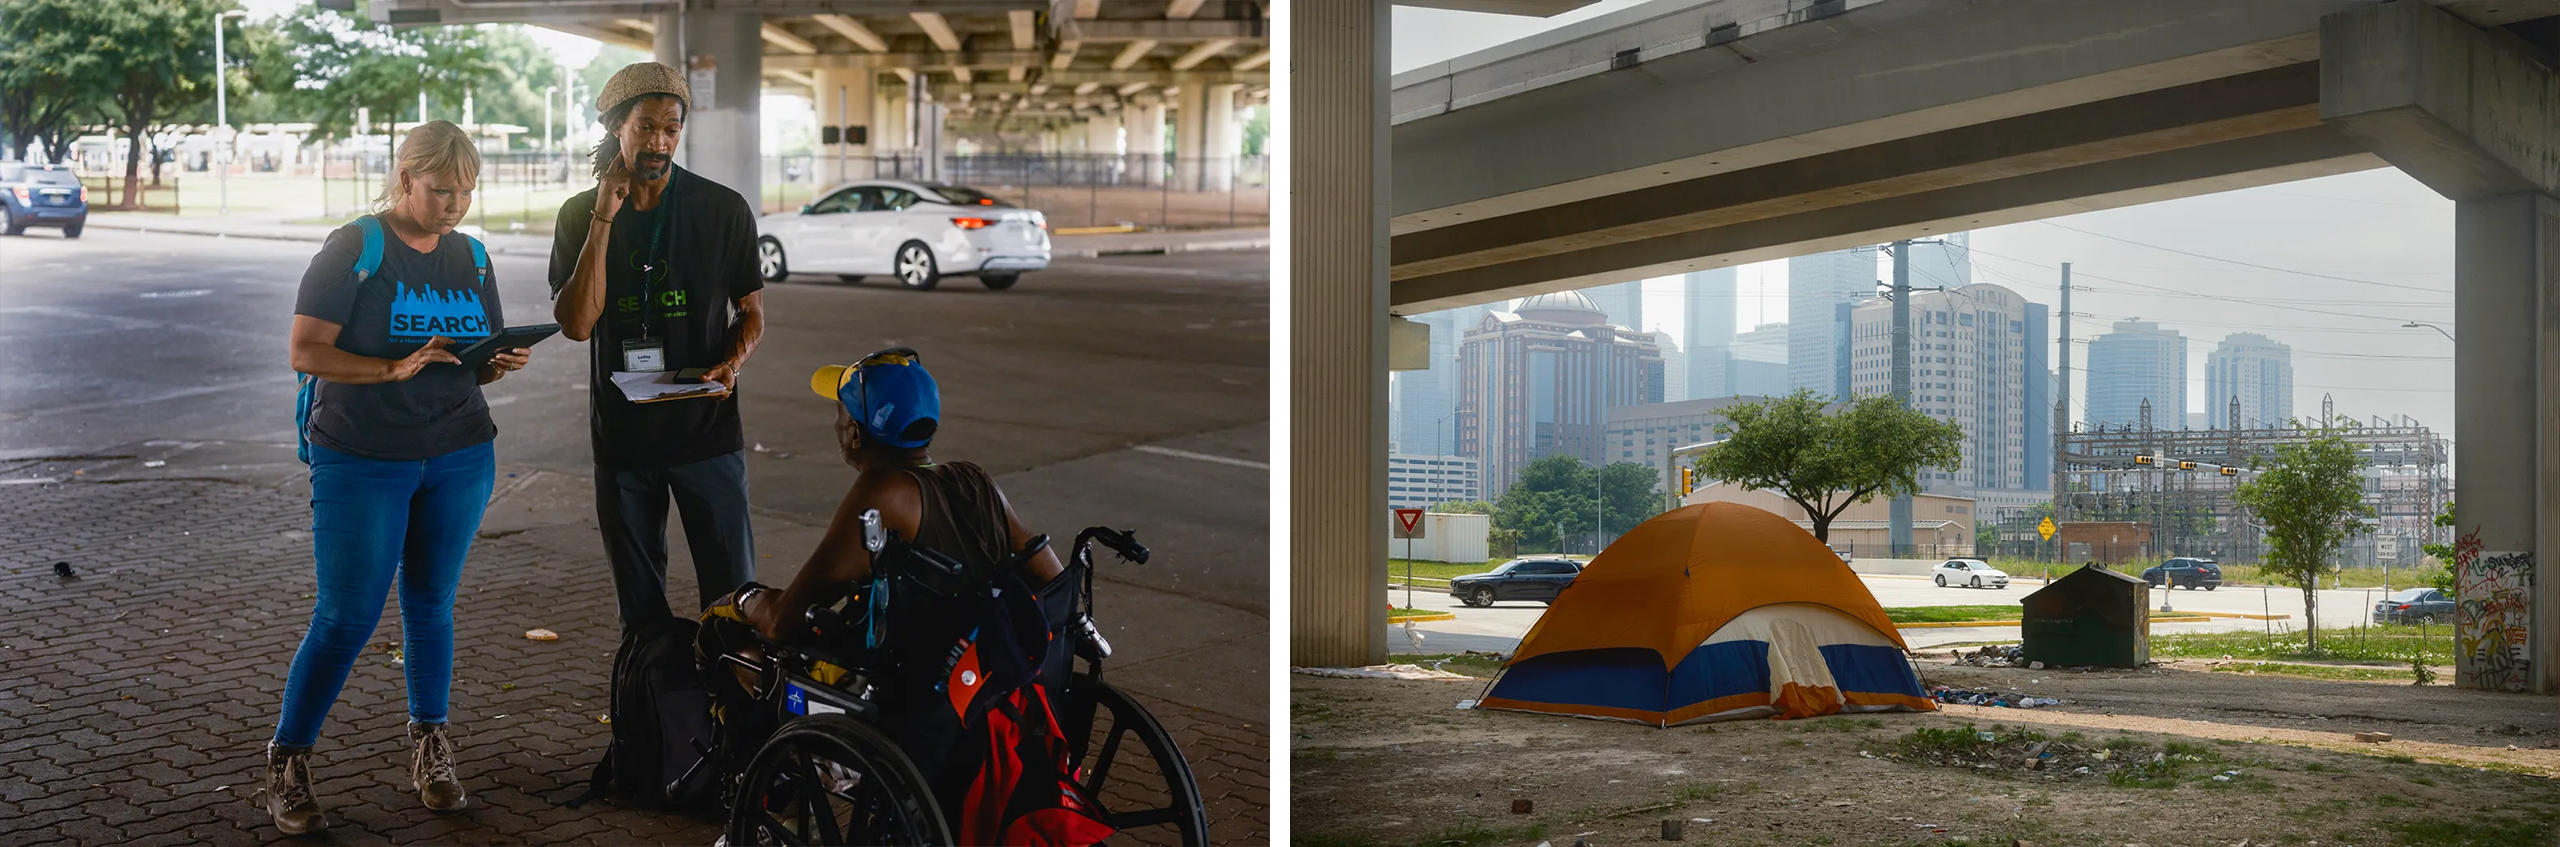 Left: Allison Hillman, left, and LaVoy Darden, right, with Search Homeless Services speak with a client about potential future housing in Houston, Texas on May 5, 2023. Right: A homeless encampment under Interstate Highway 69 in downtown Houston on May 5, 2023.